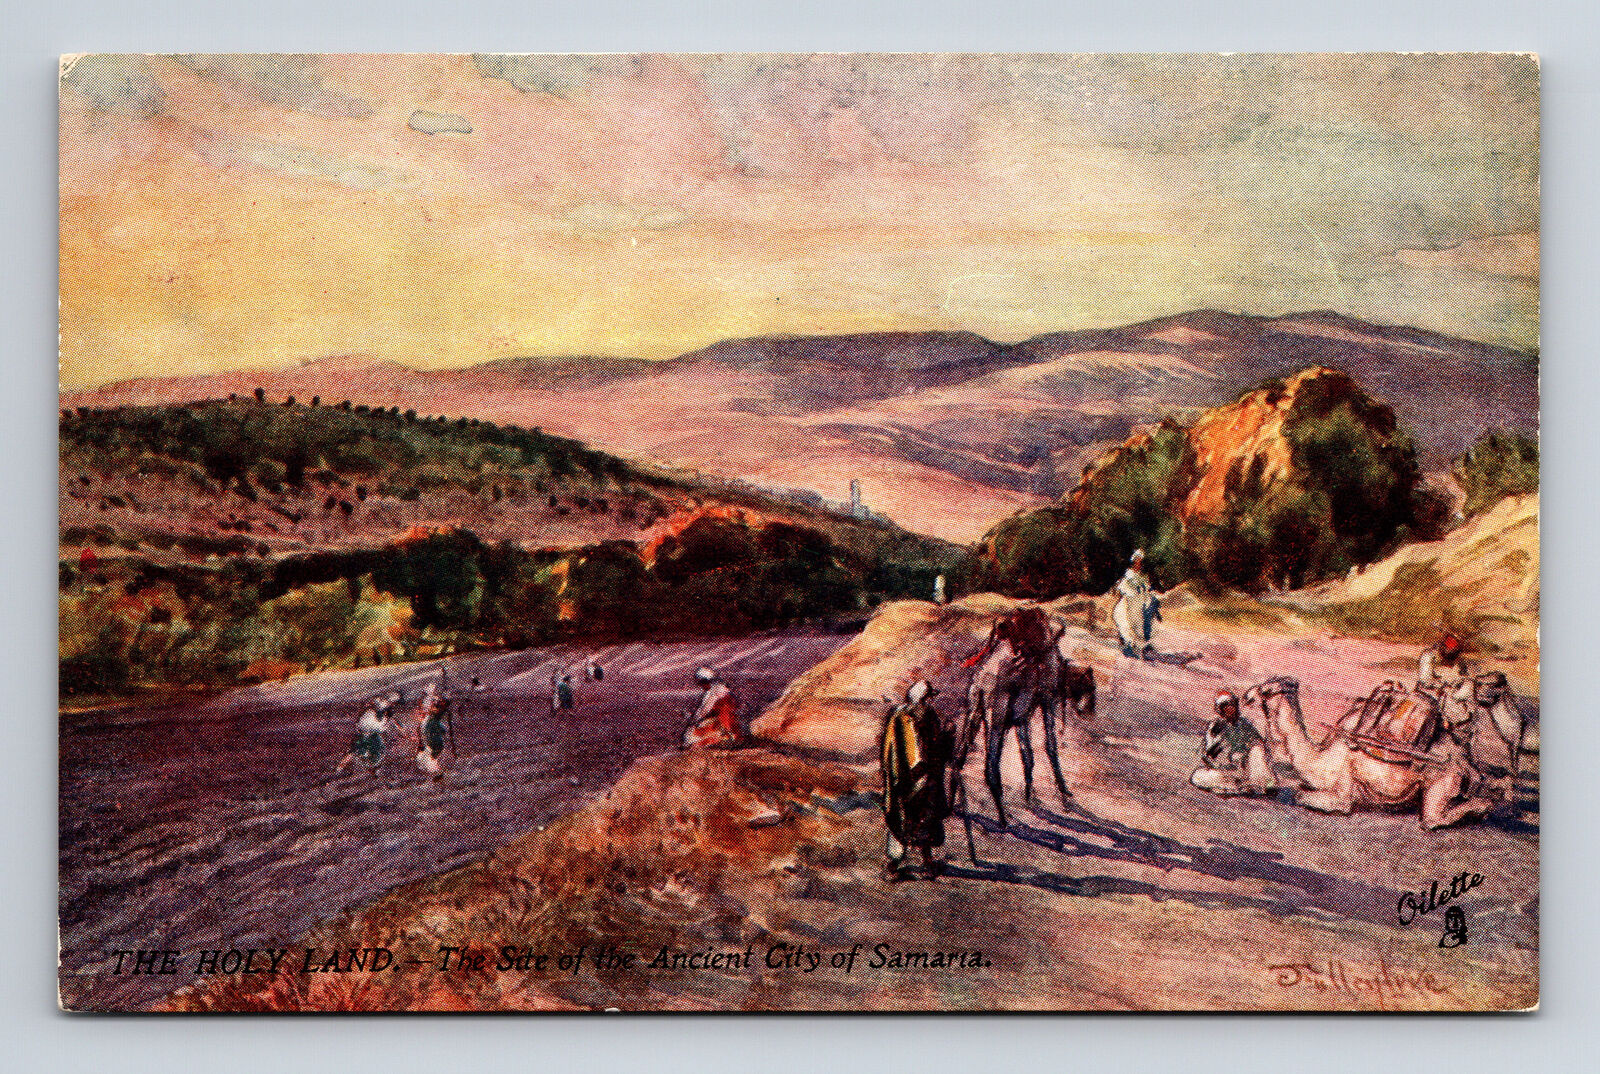 Site of the Ancient City of Sumaria The Holy Land Series Tuck\'s Oilette Postcard